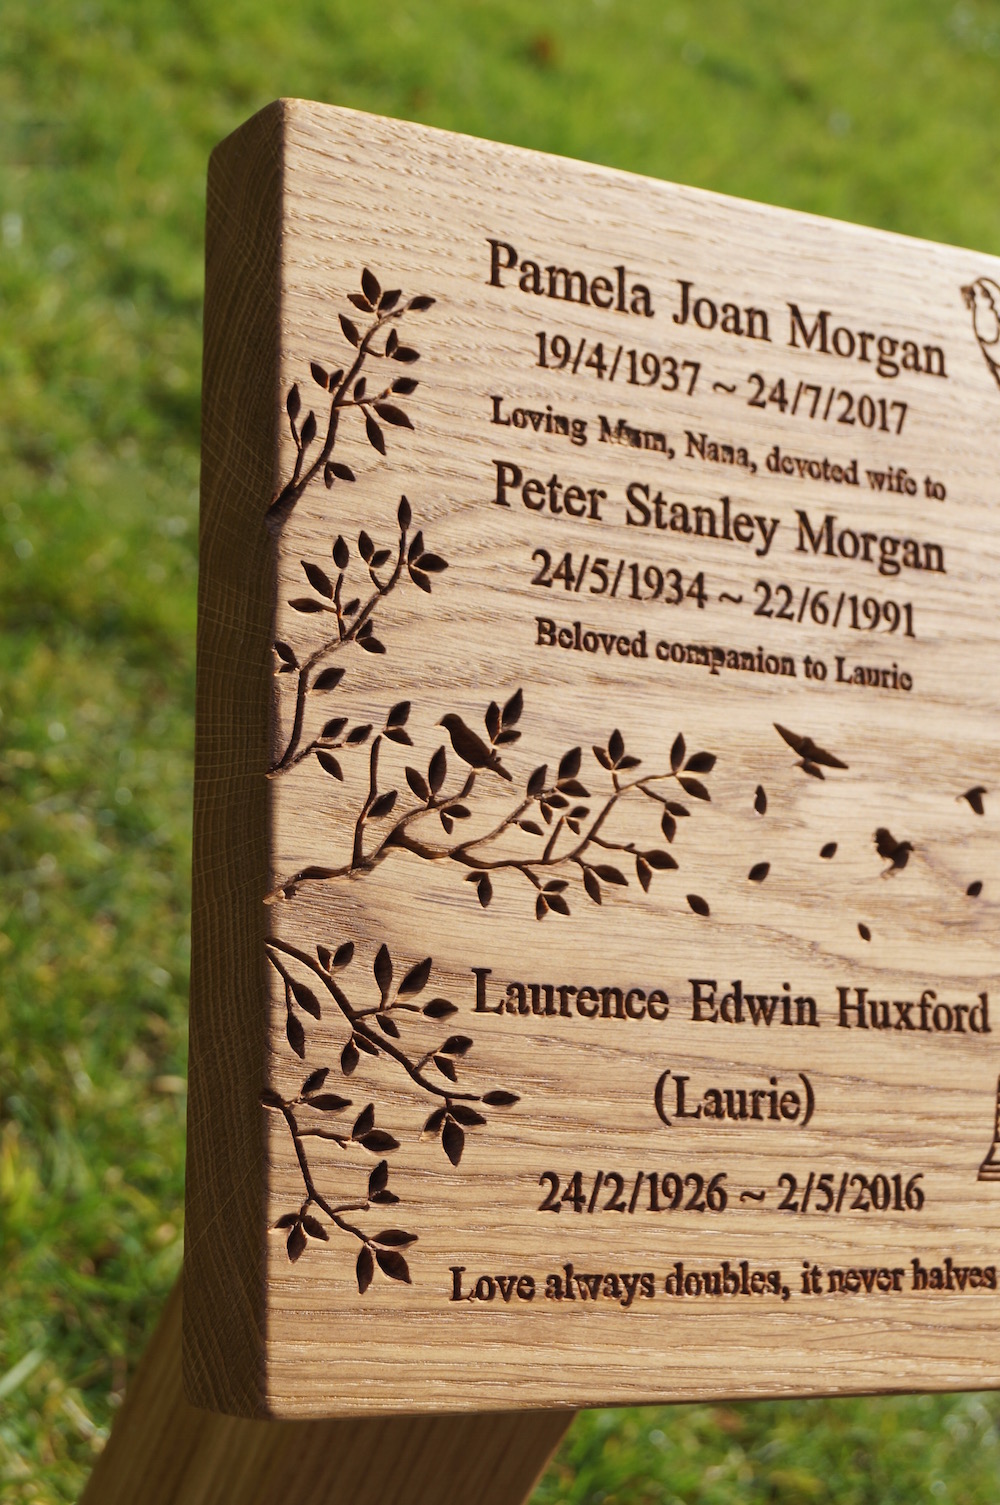 personalised-wooden-burial-marker-makemesomethingspecial.com